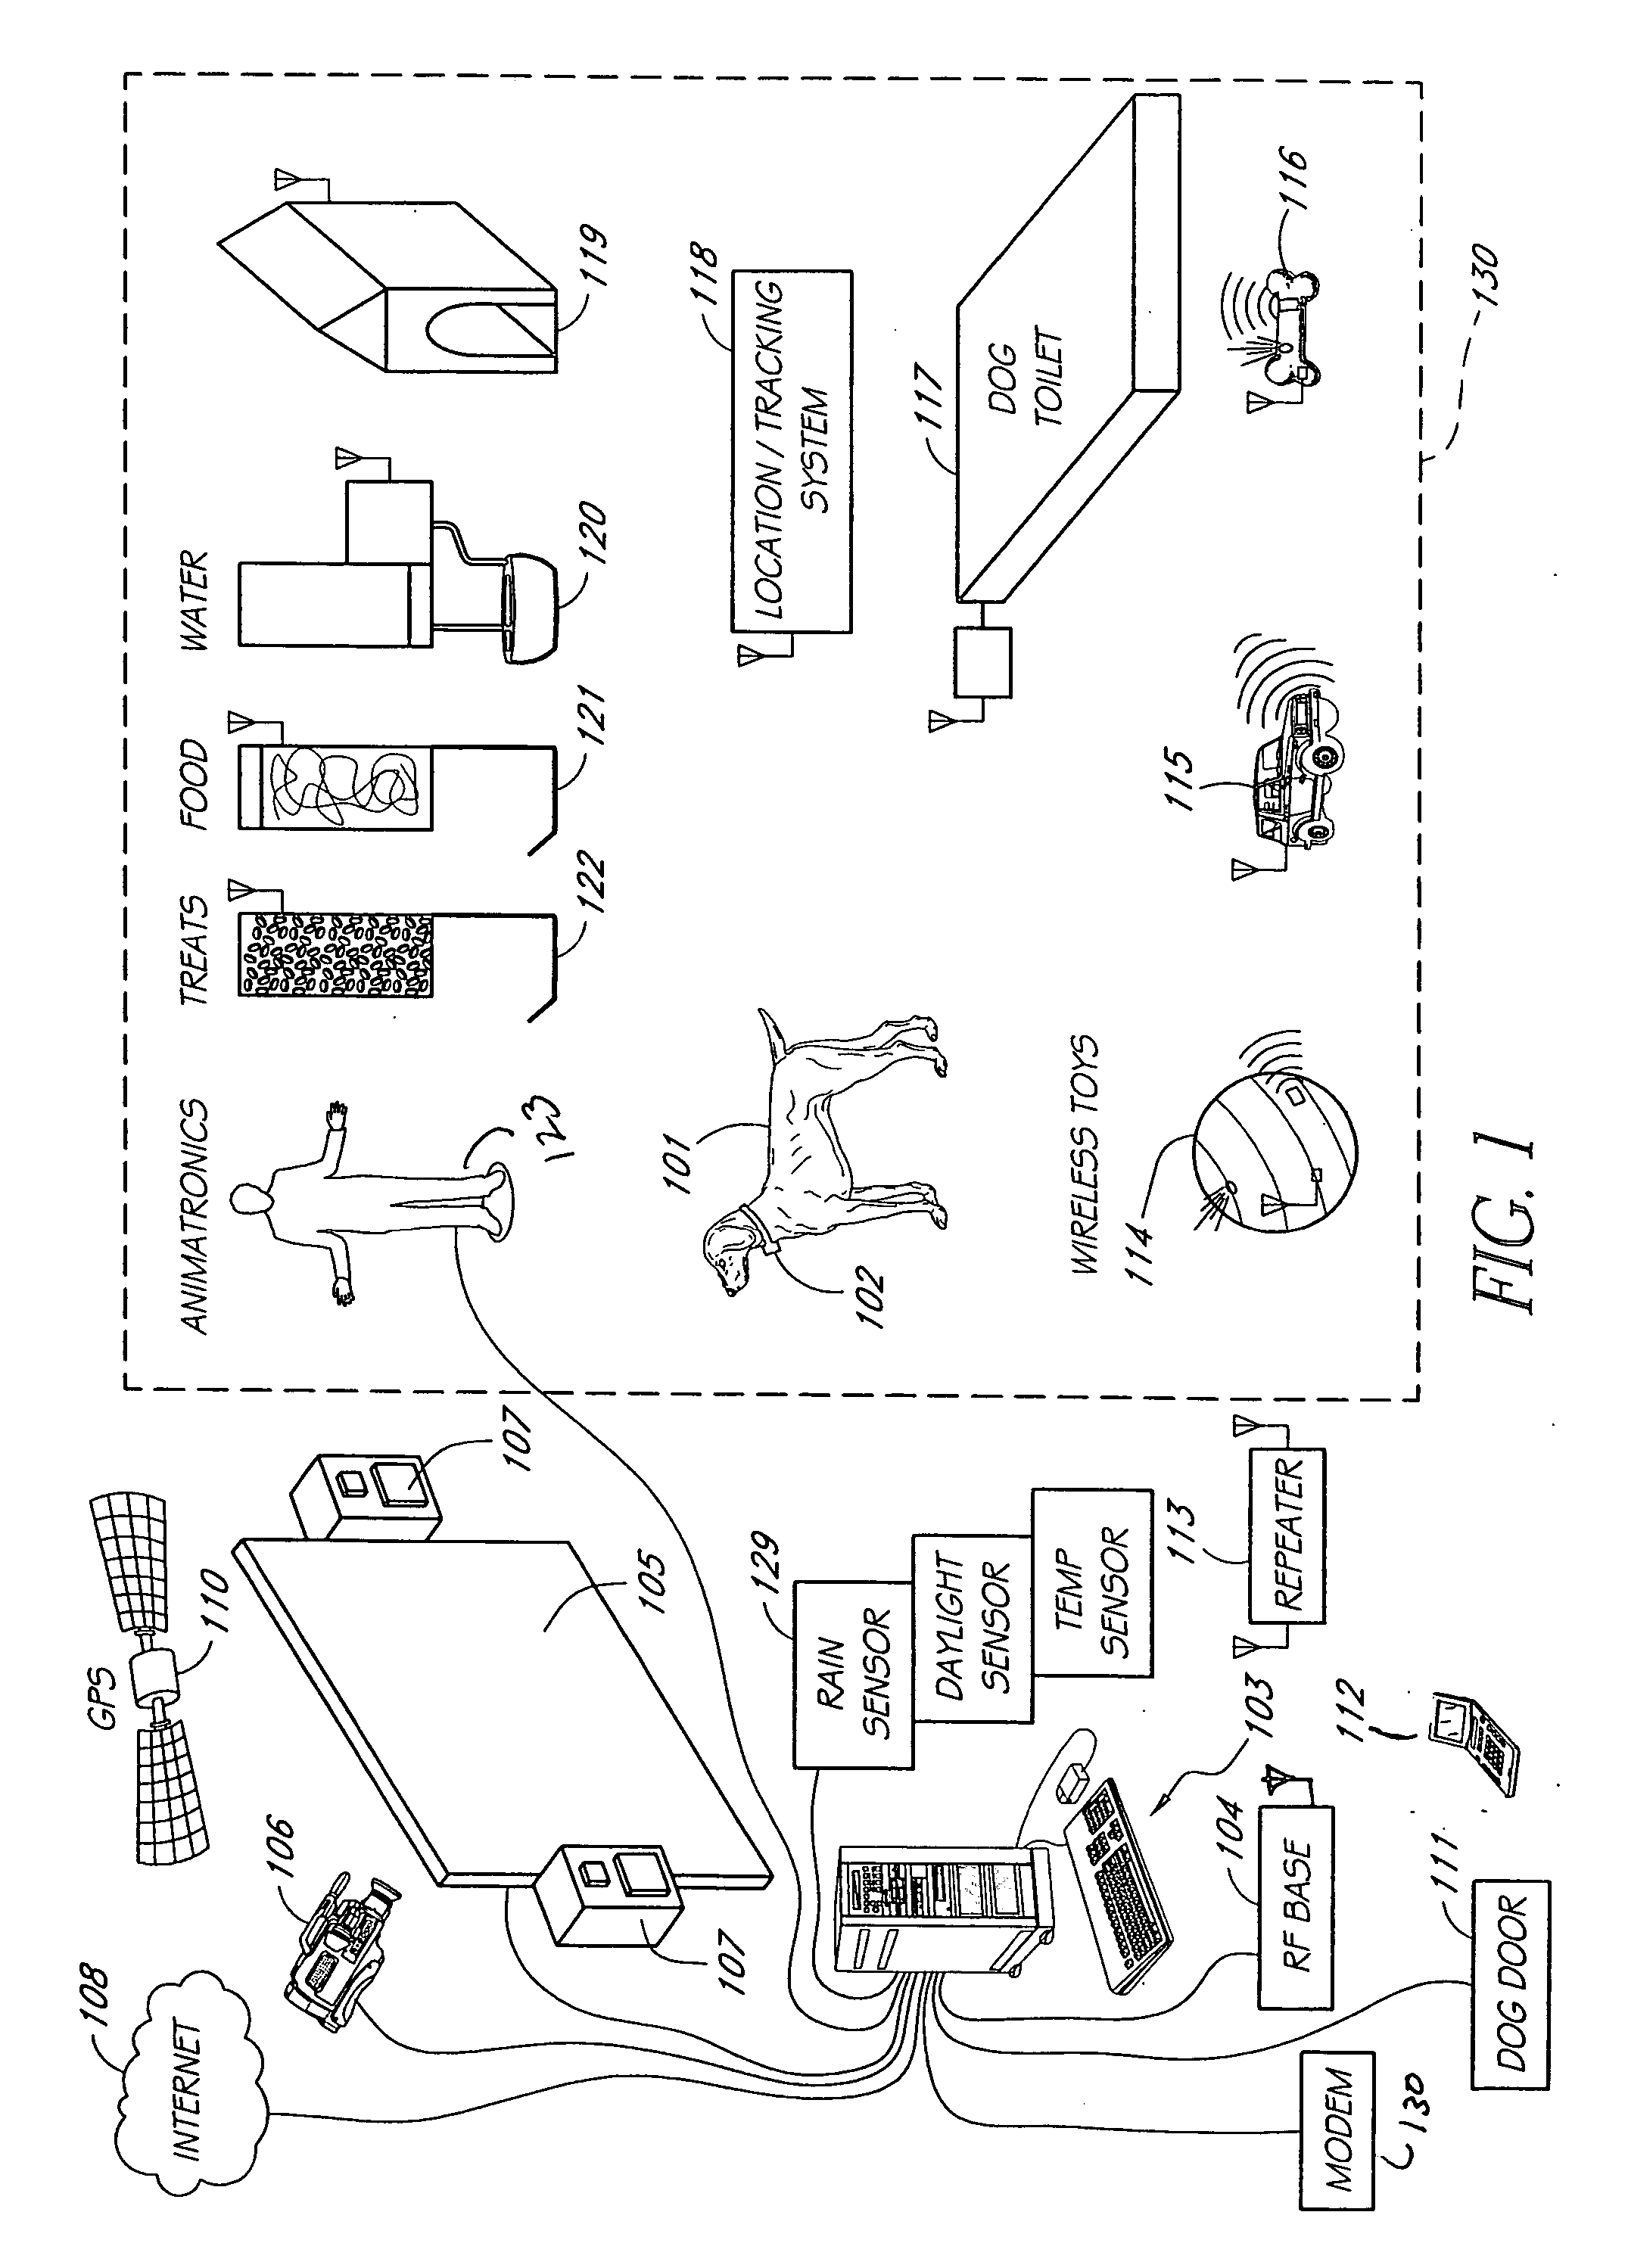 System and method for canine training